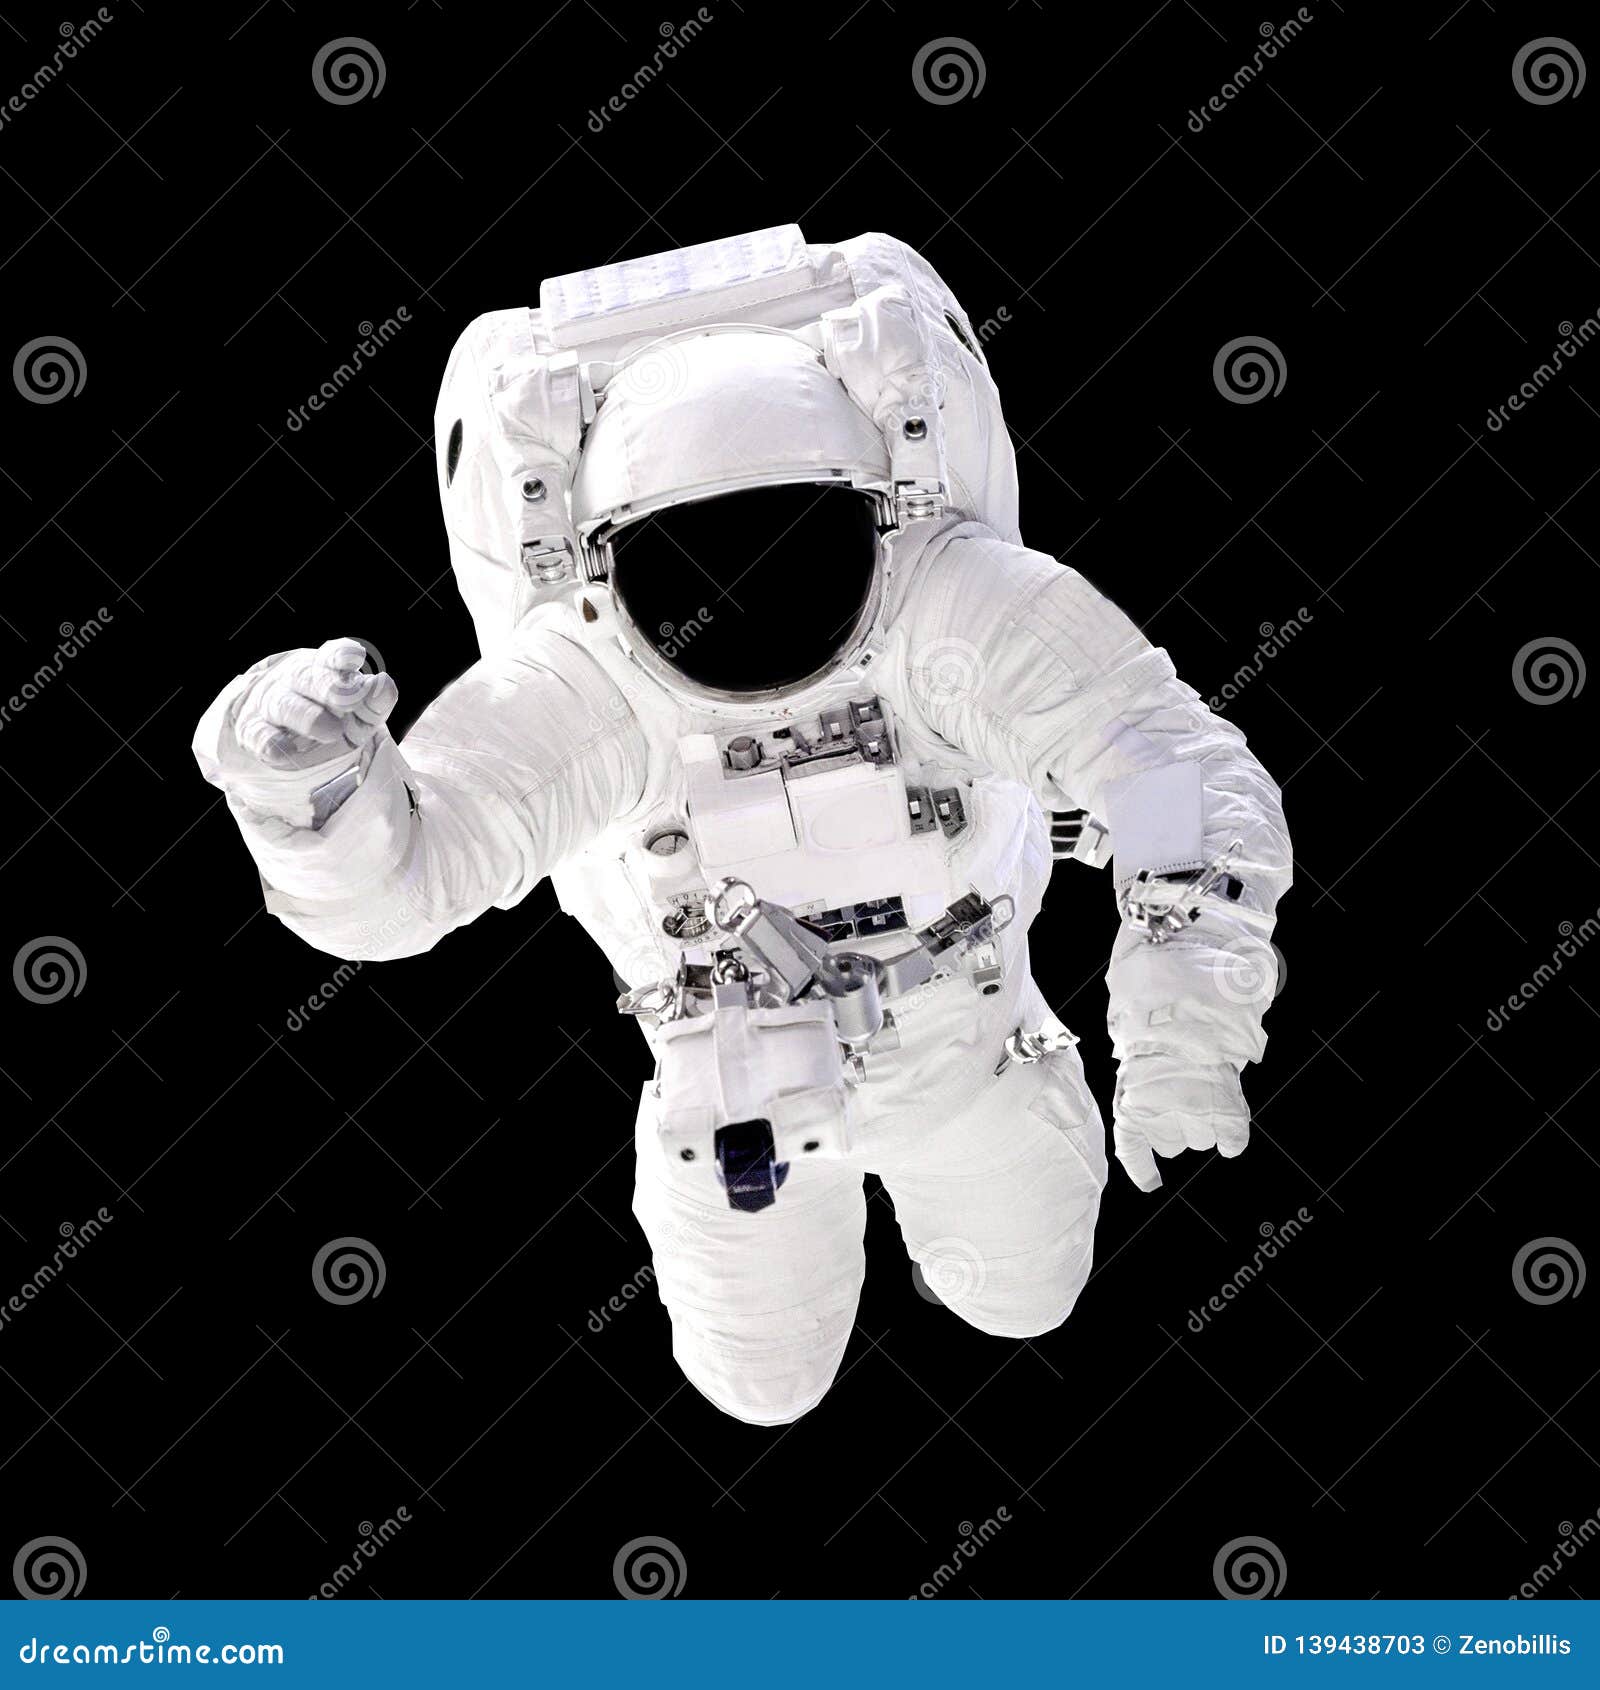 astronaut in spacesuit close up  on black background.